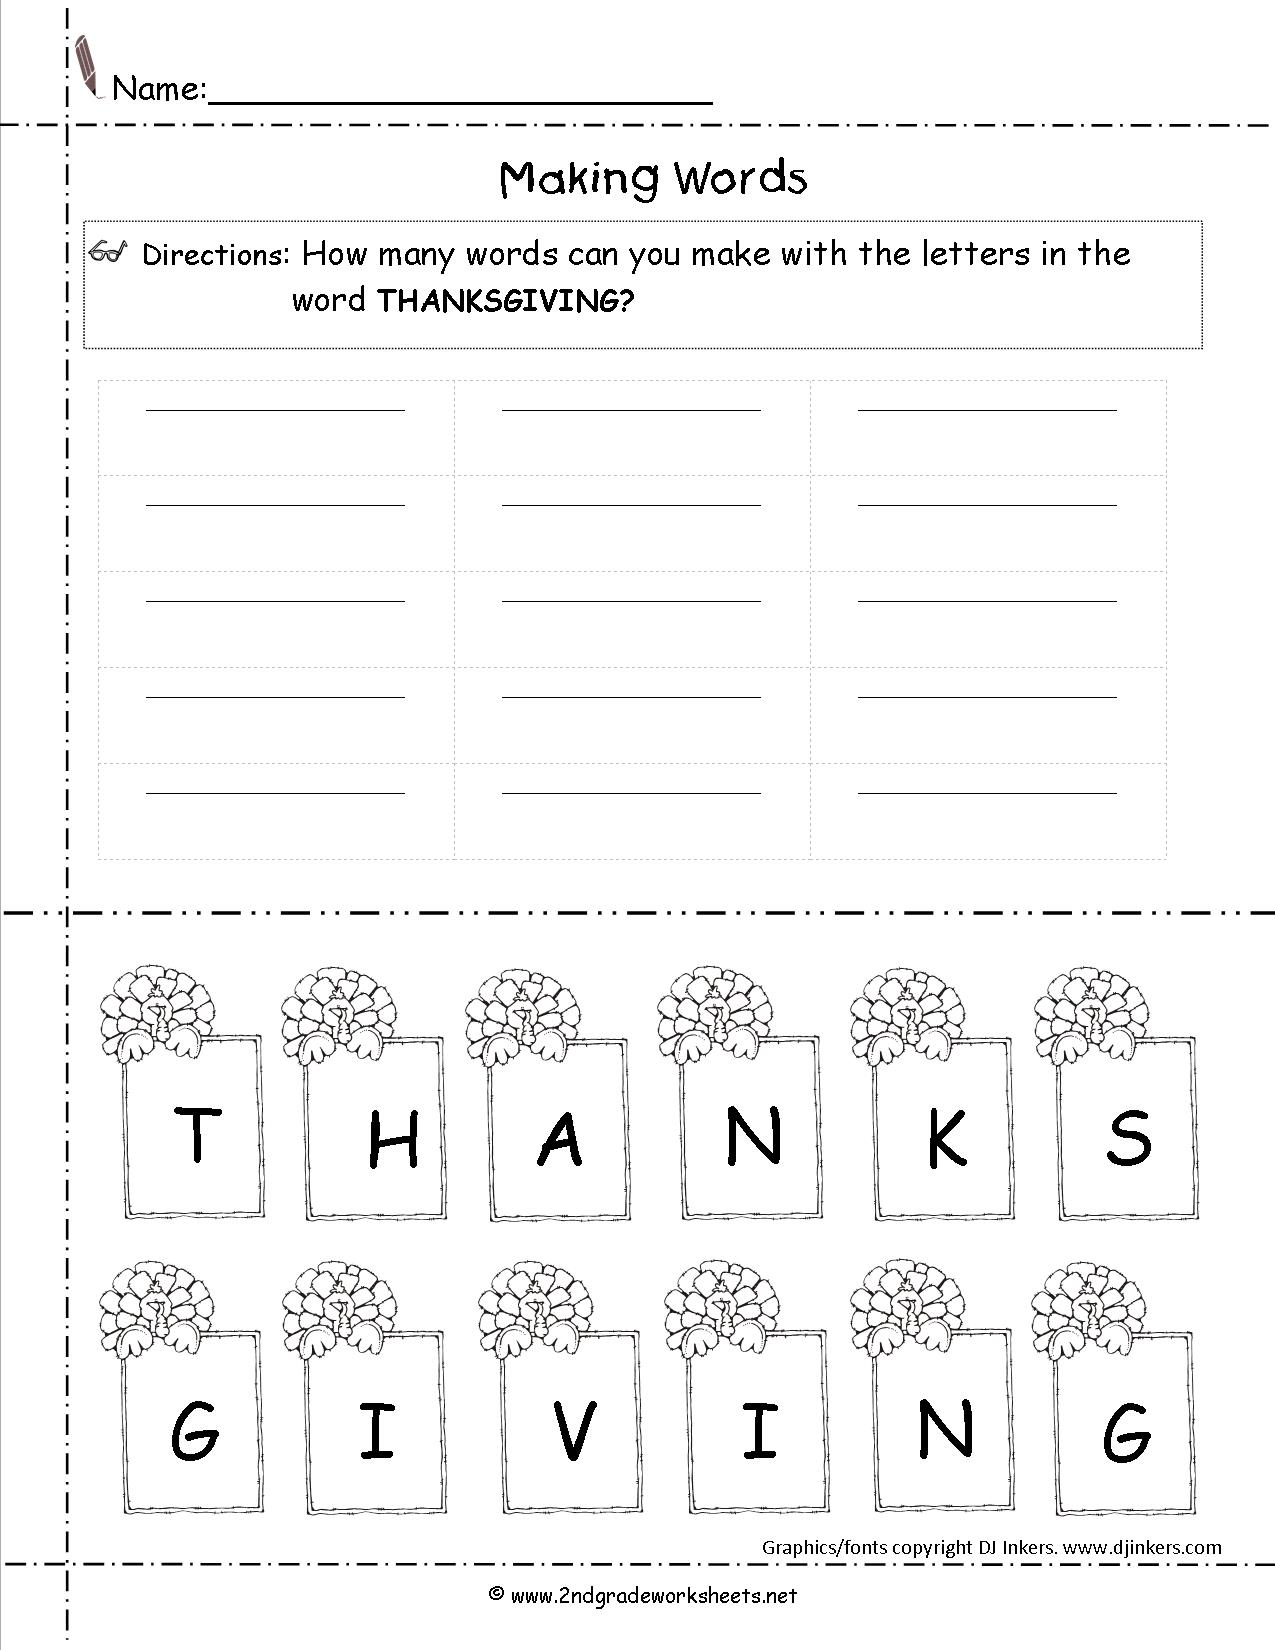 Thanksgiving Printouts And Worksheets - Free Printable Thanksgiving Worksheets